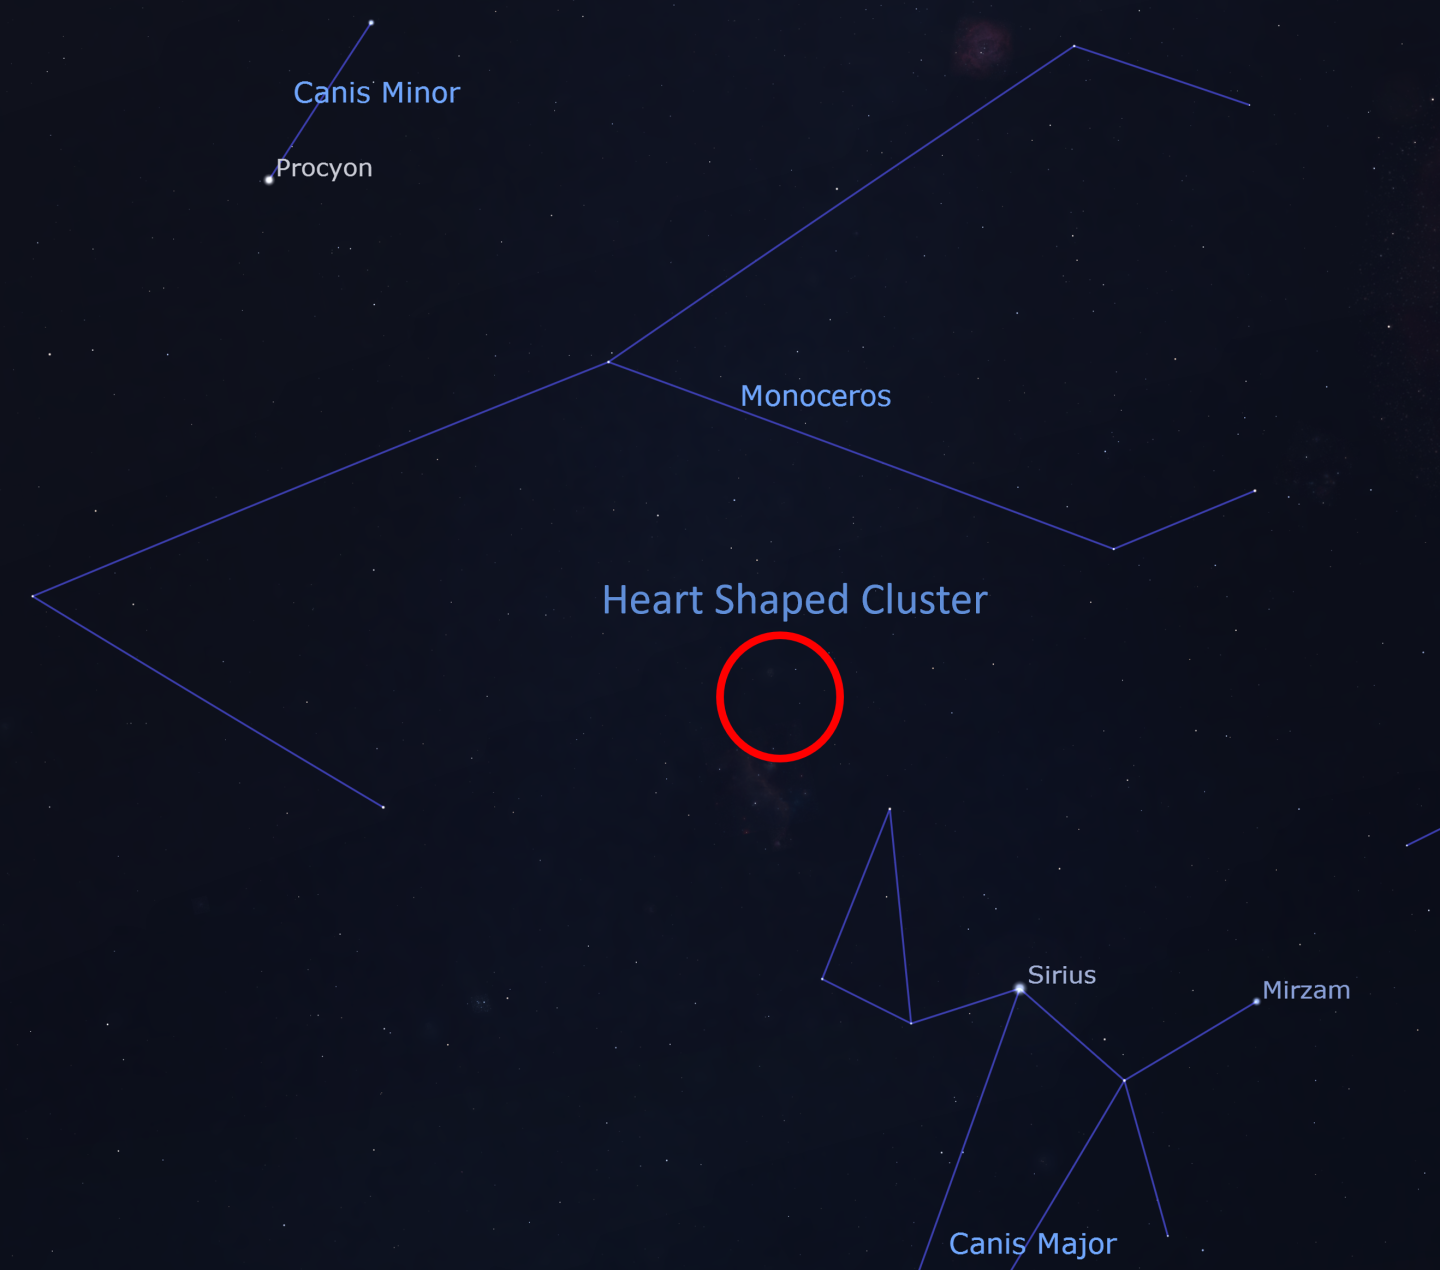 Heart Shaped Cluster in between Monoceros and Canis Major